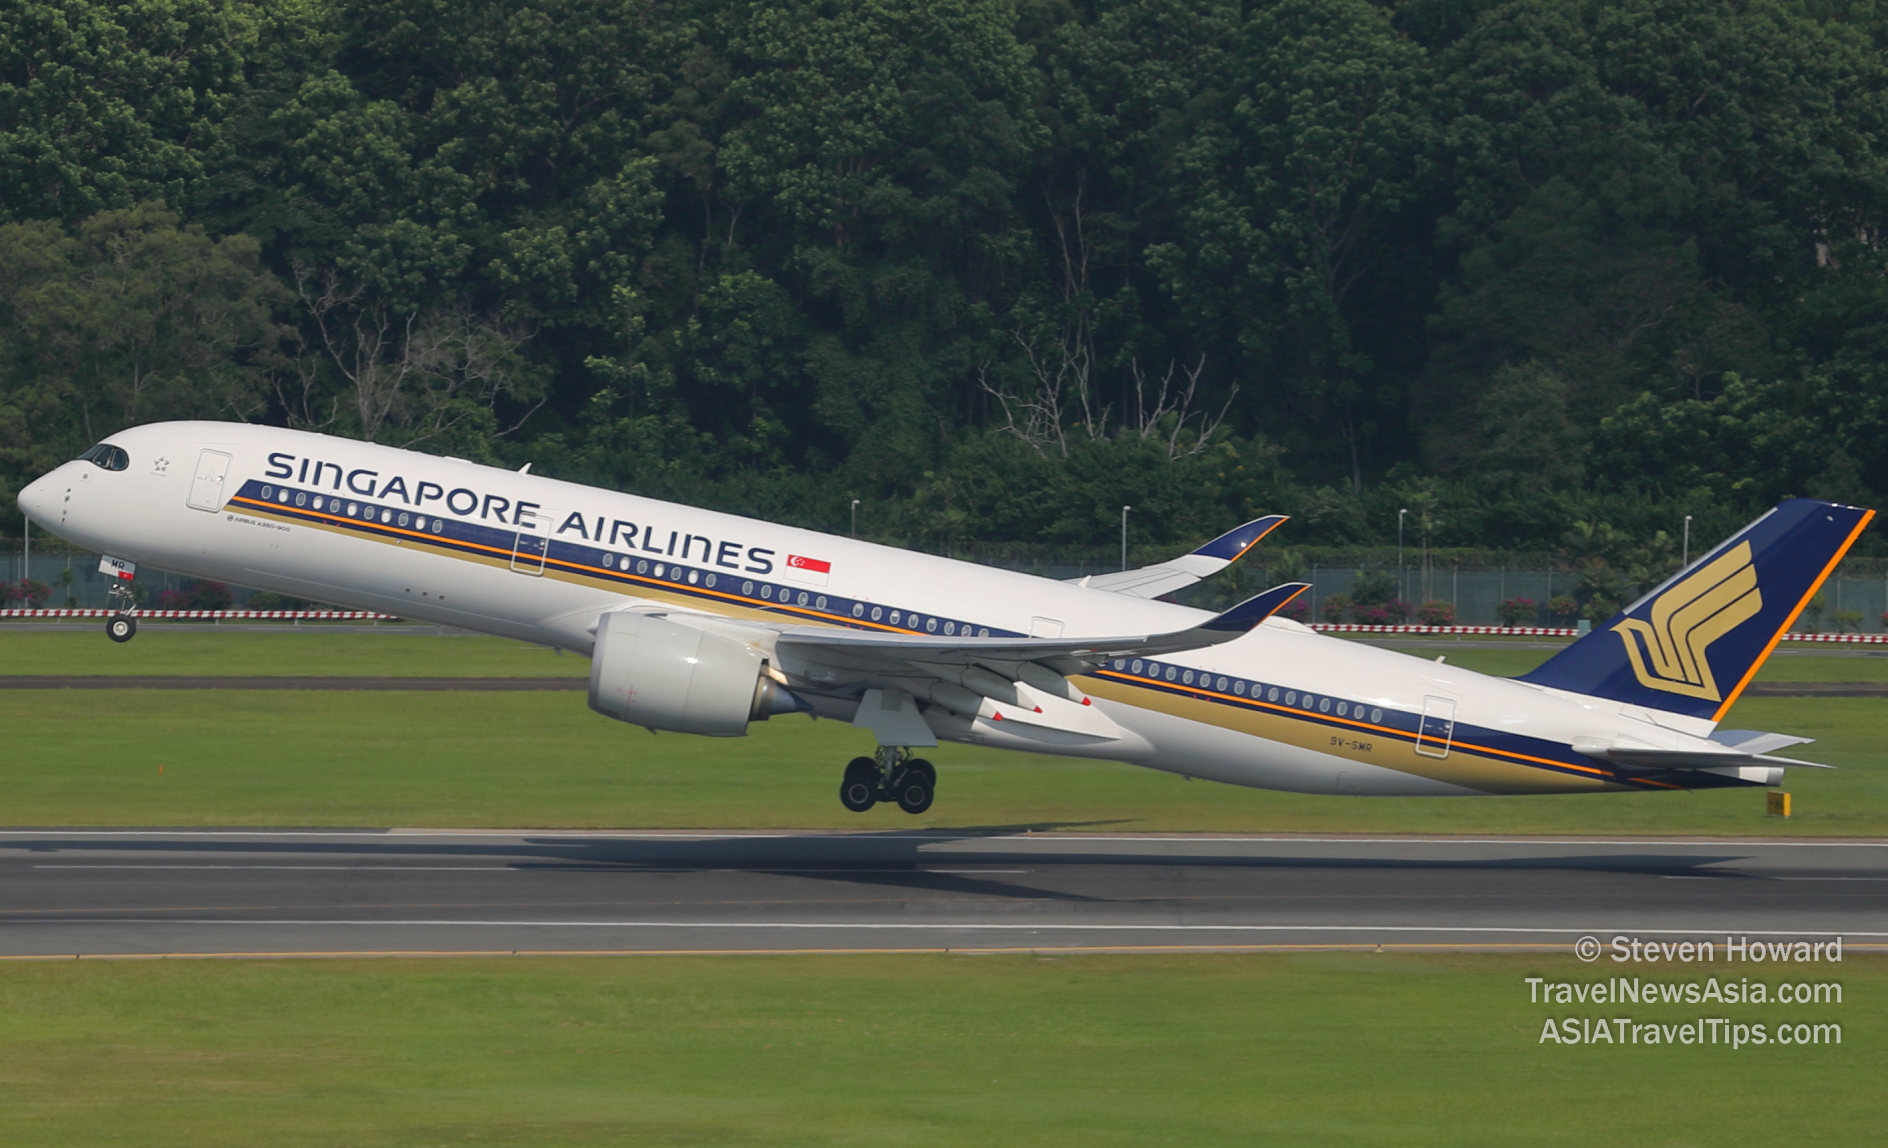 Singapore Airlines A350-900. Picture by Steven Howard of TravelNewsAsia.com Click to enlarge.